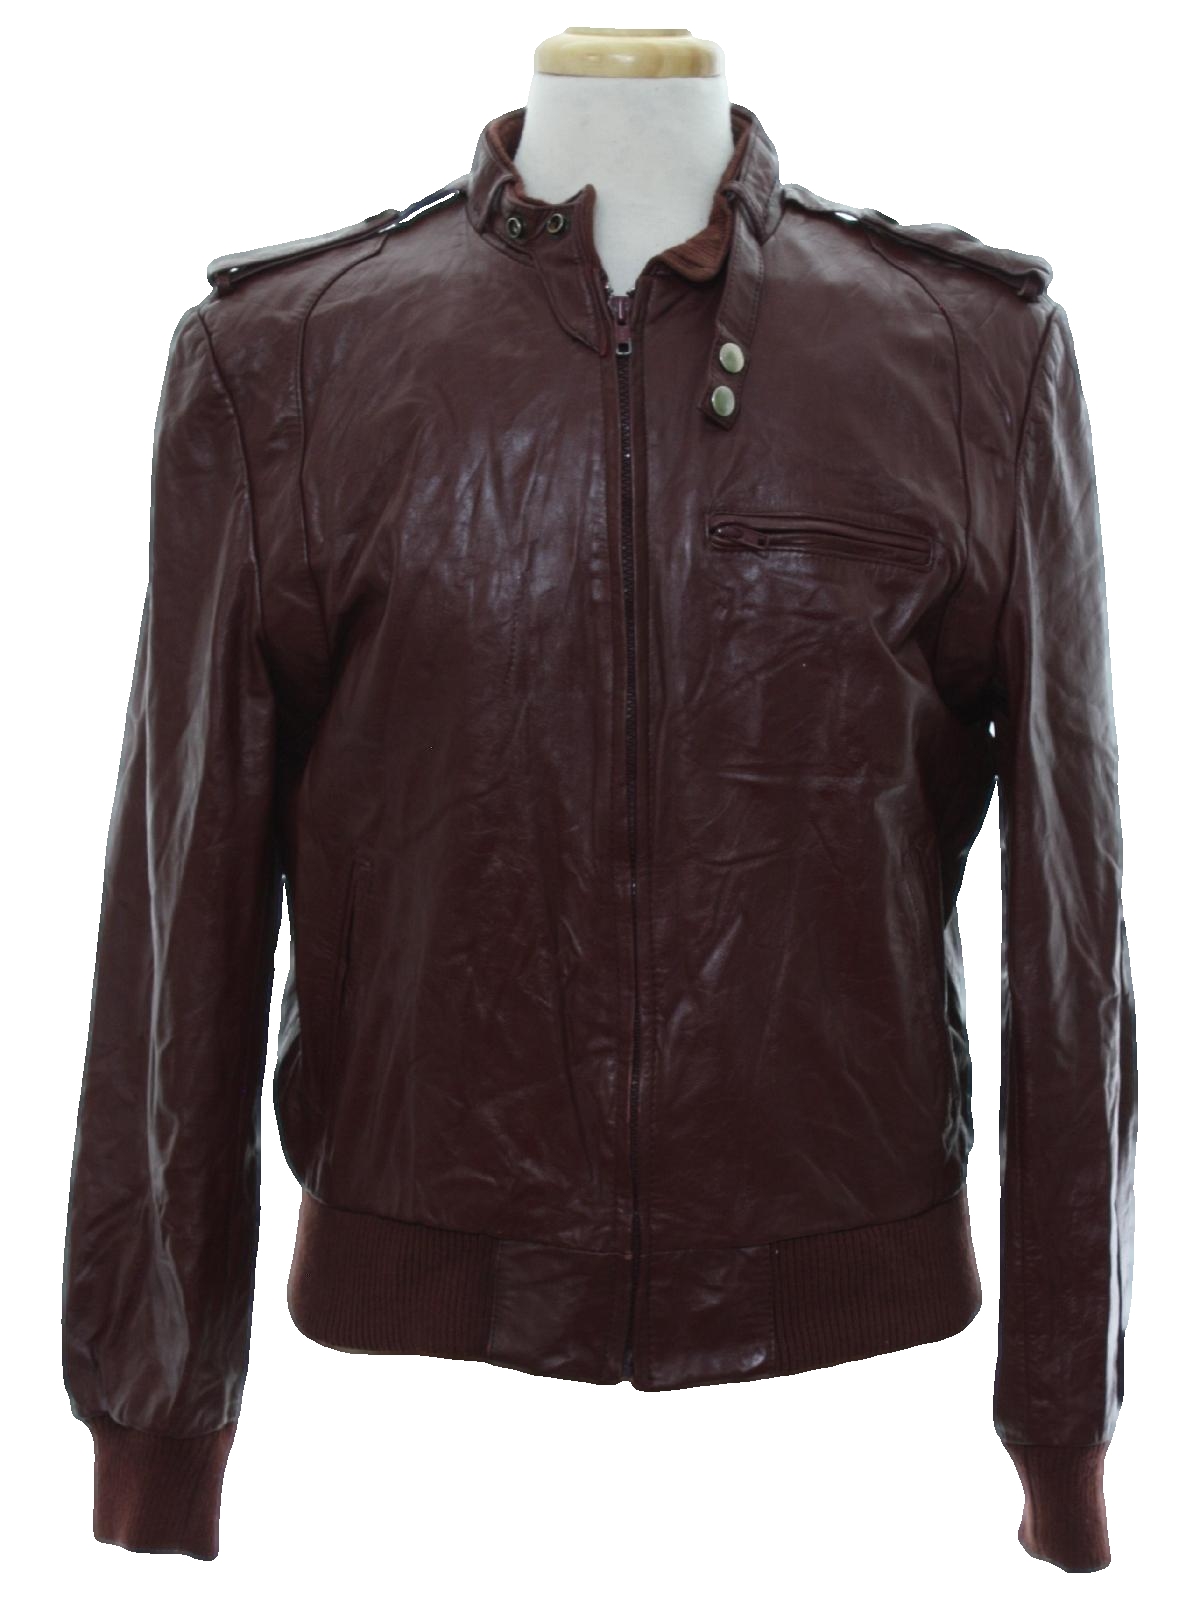 Details about   Men's PLAYER Brown 80's Retro Style PUFFER CHEST Lambskin Leather Jacket 4757 